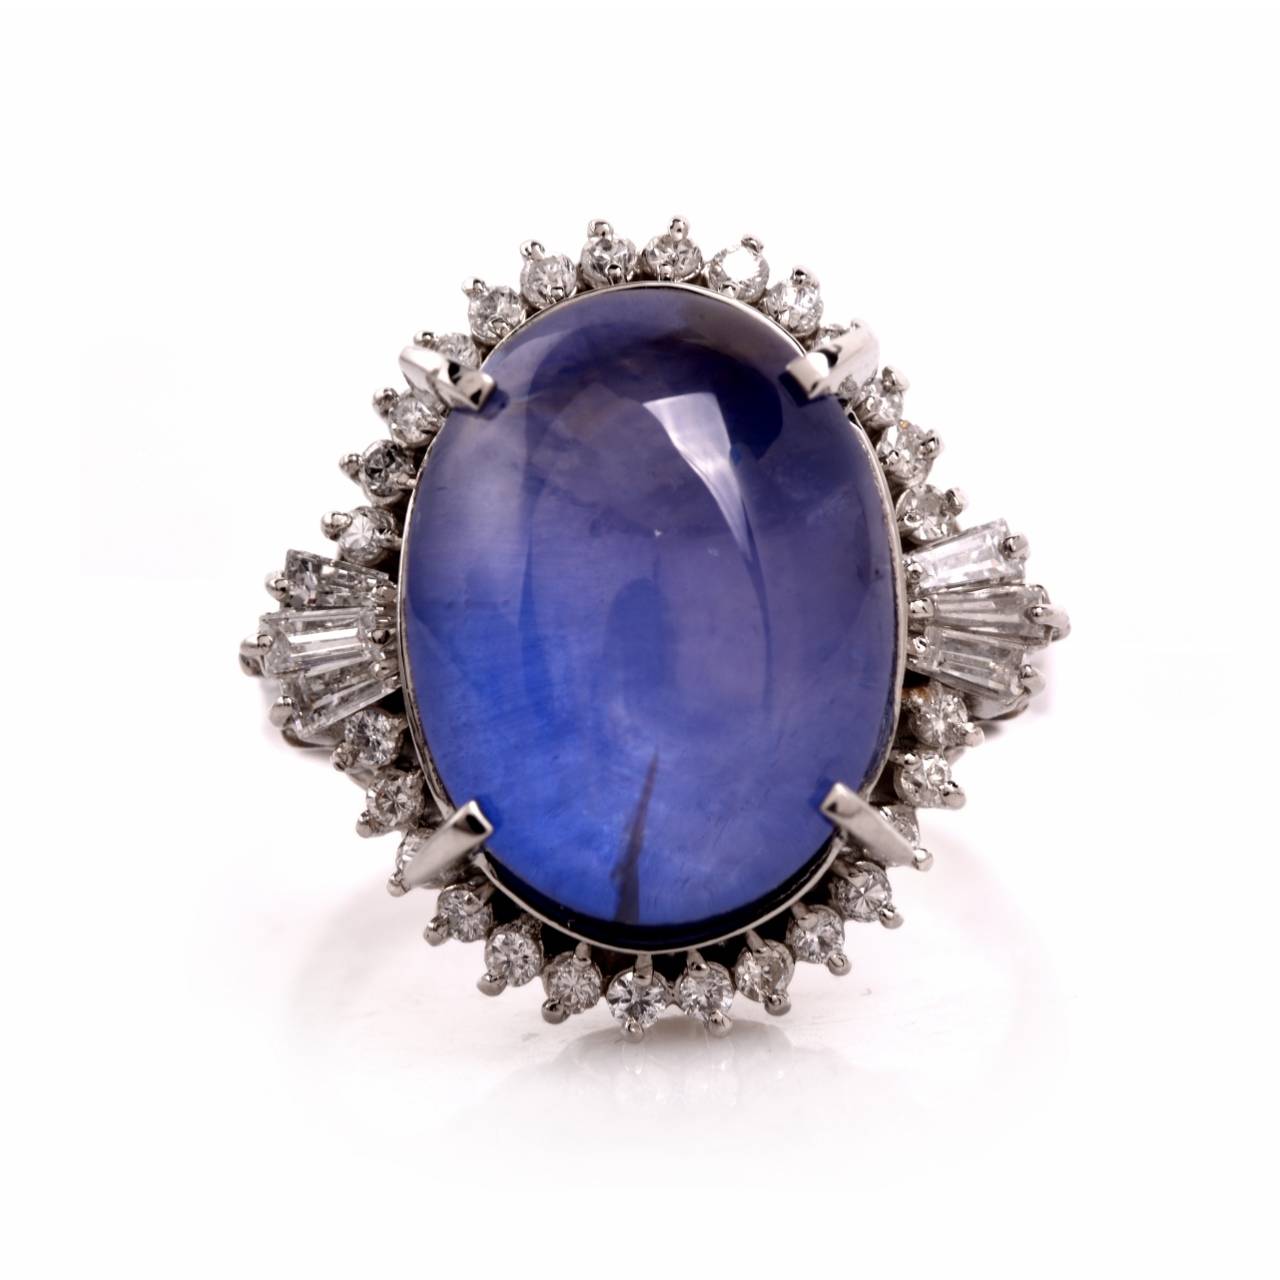 This stunning estate ring is crafted in solid platinum. Showcasing an impressive statement design that is centered with 1 genuine oval cabochon Natural No heat blue sapphire approx: 21.48cttw that is framed by 28 genuine round cut diamonds and  6